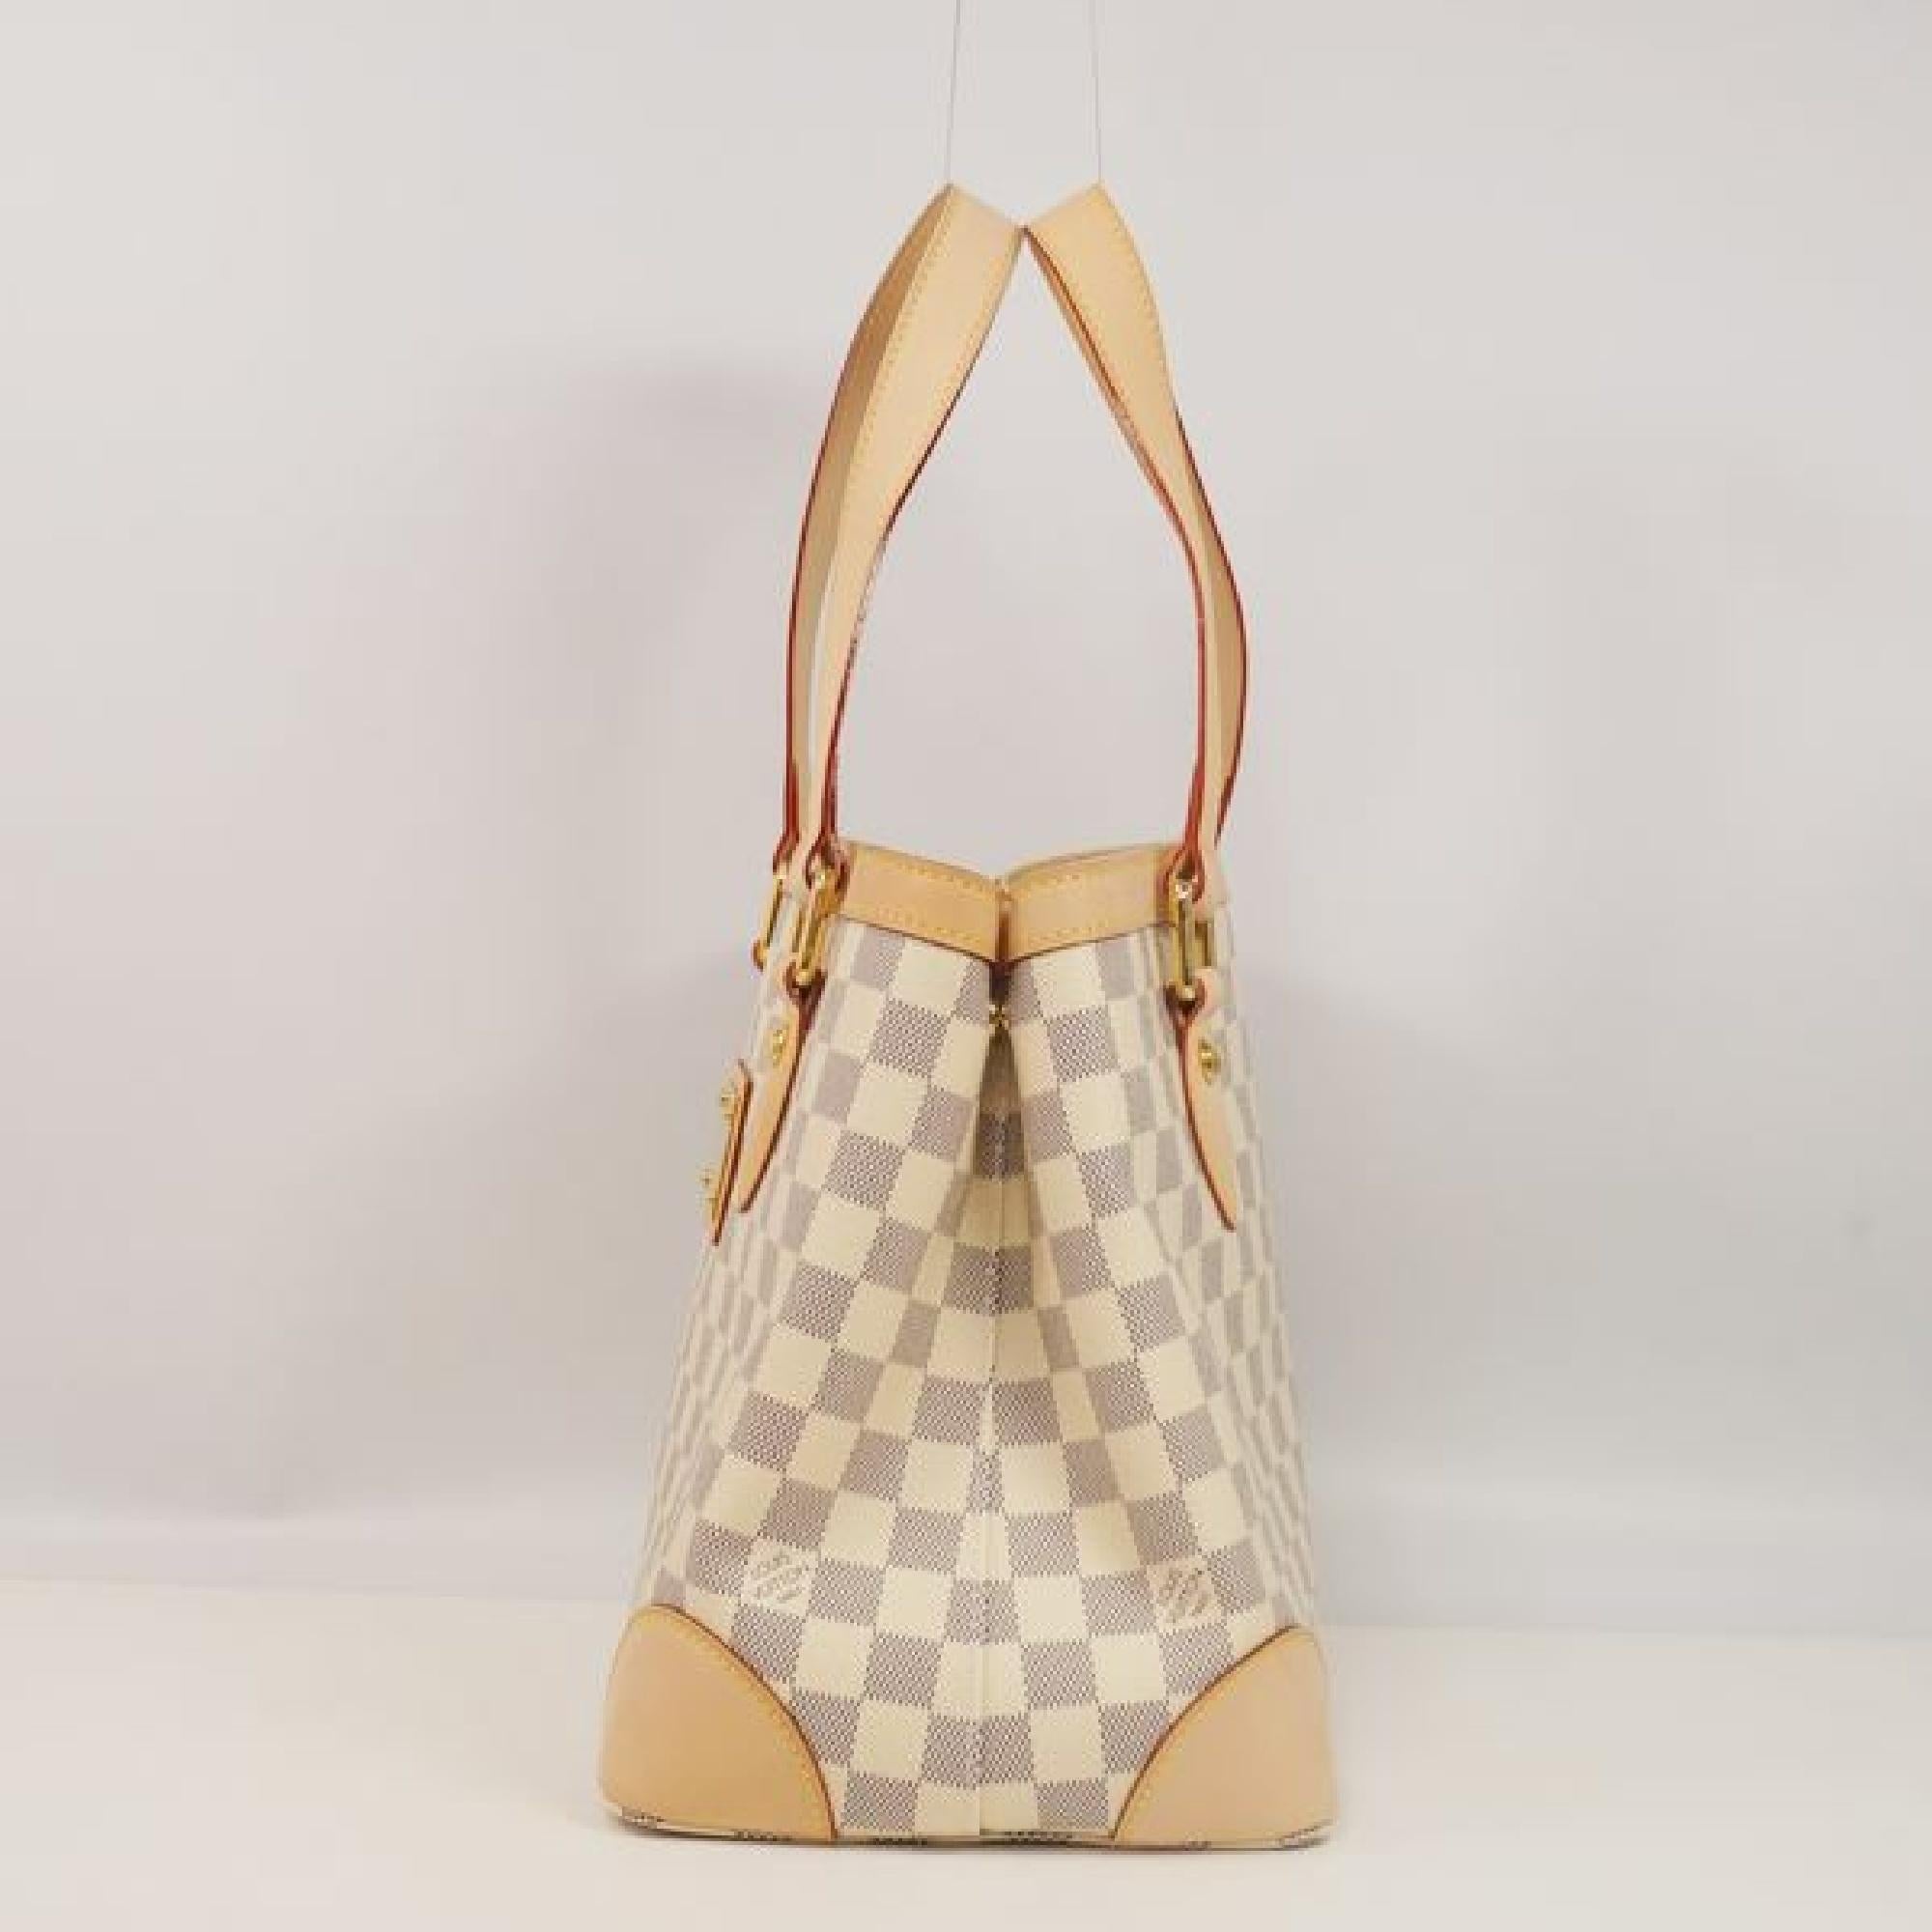 An authentic LOUIS VUITTON Hempstead PM Womens handbag N51207 The outside material is Damier Azur canvas. The pattern is HempsteadPM. This item is Contemporary. The year of manufacture would be 2012.
Rank
SA slightly beautiful goods
A slightly upper